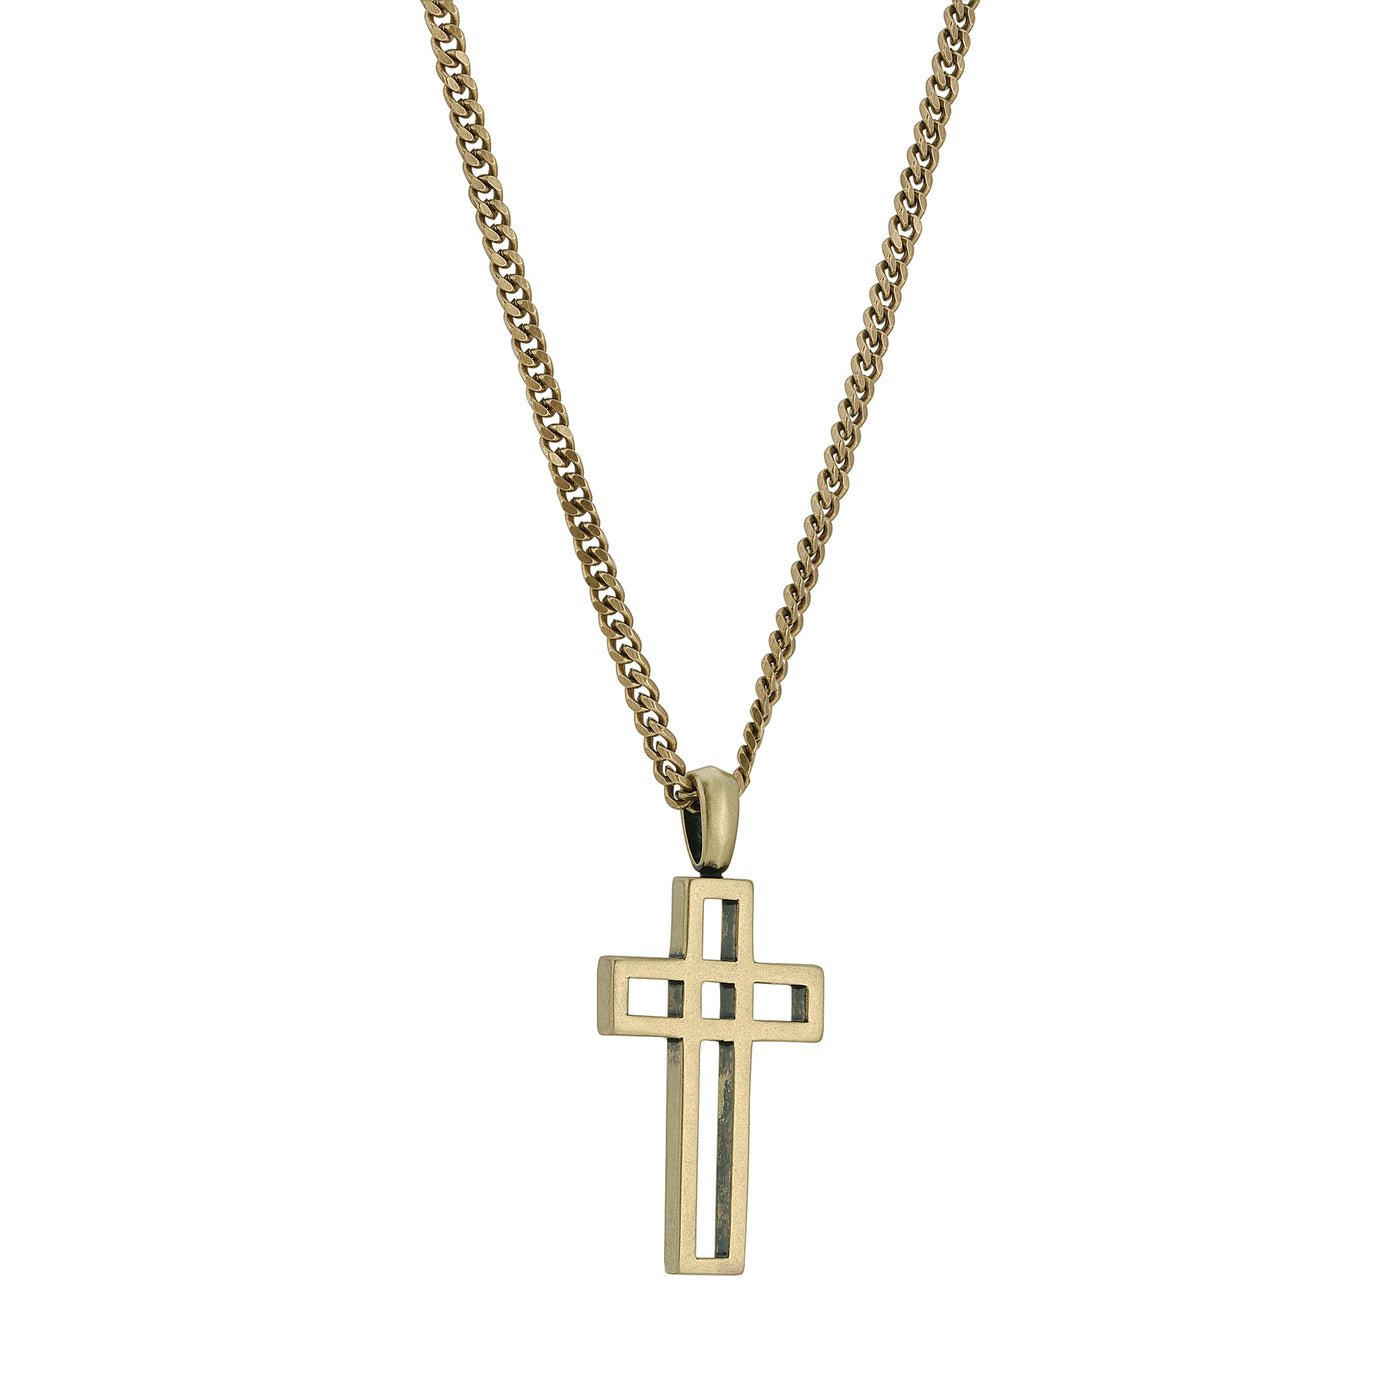 Antique Honor Cross Necklace in Gold